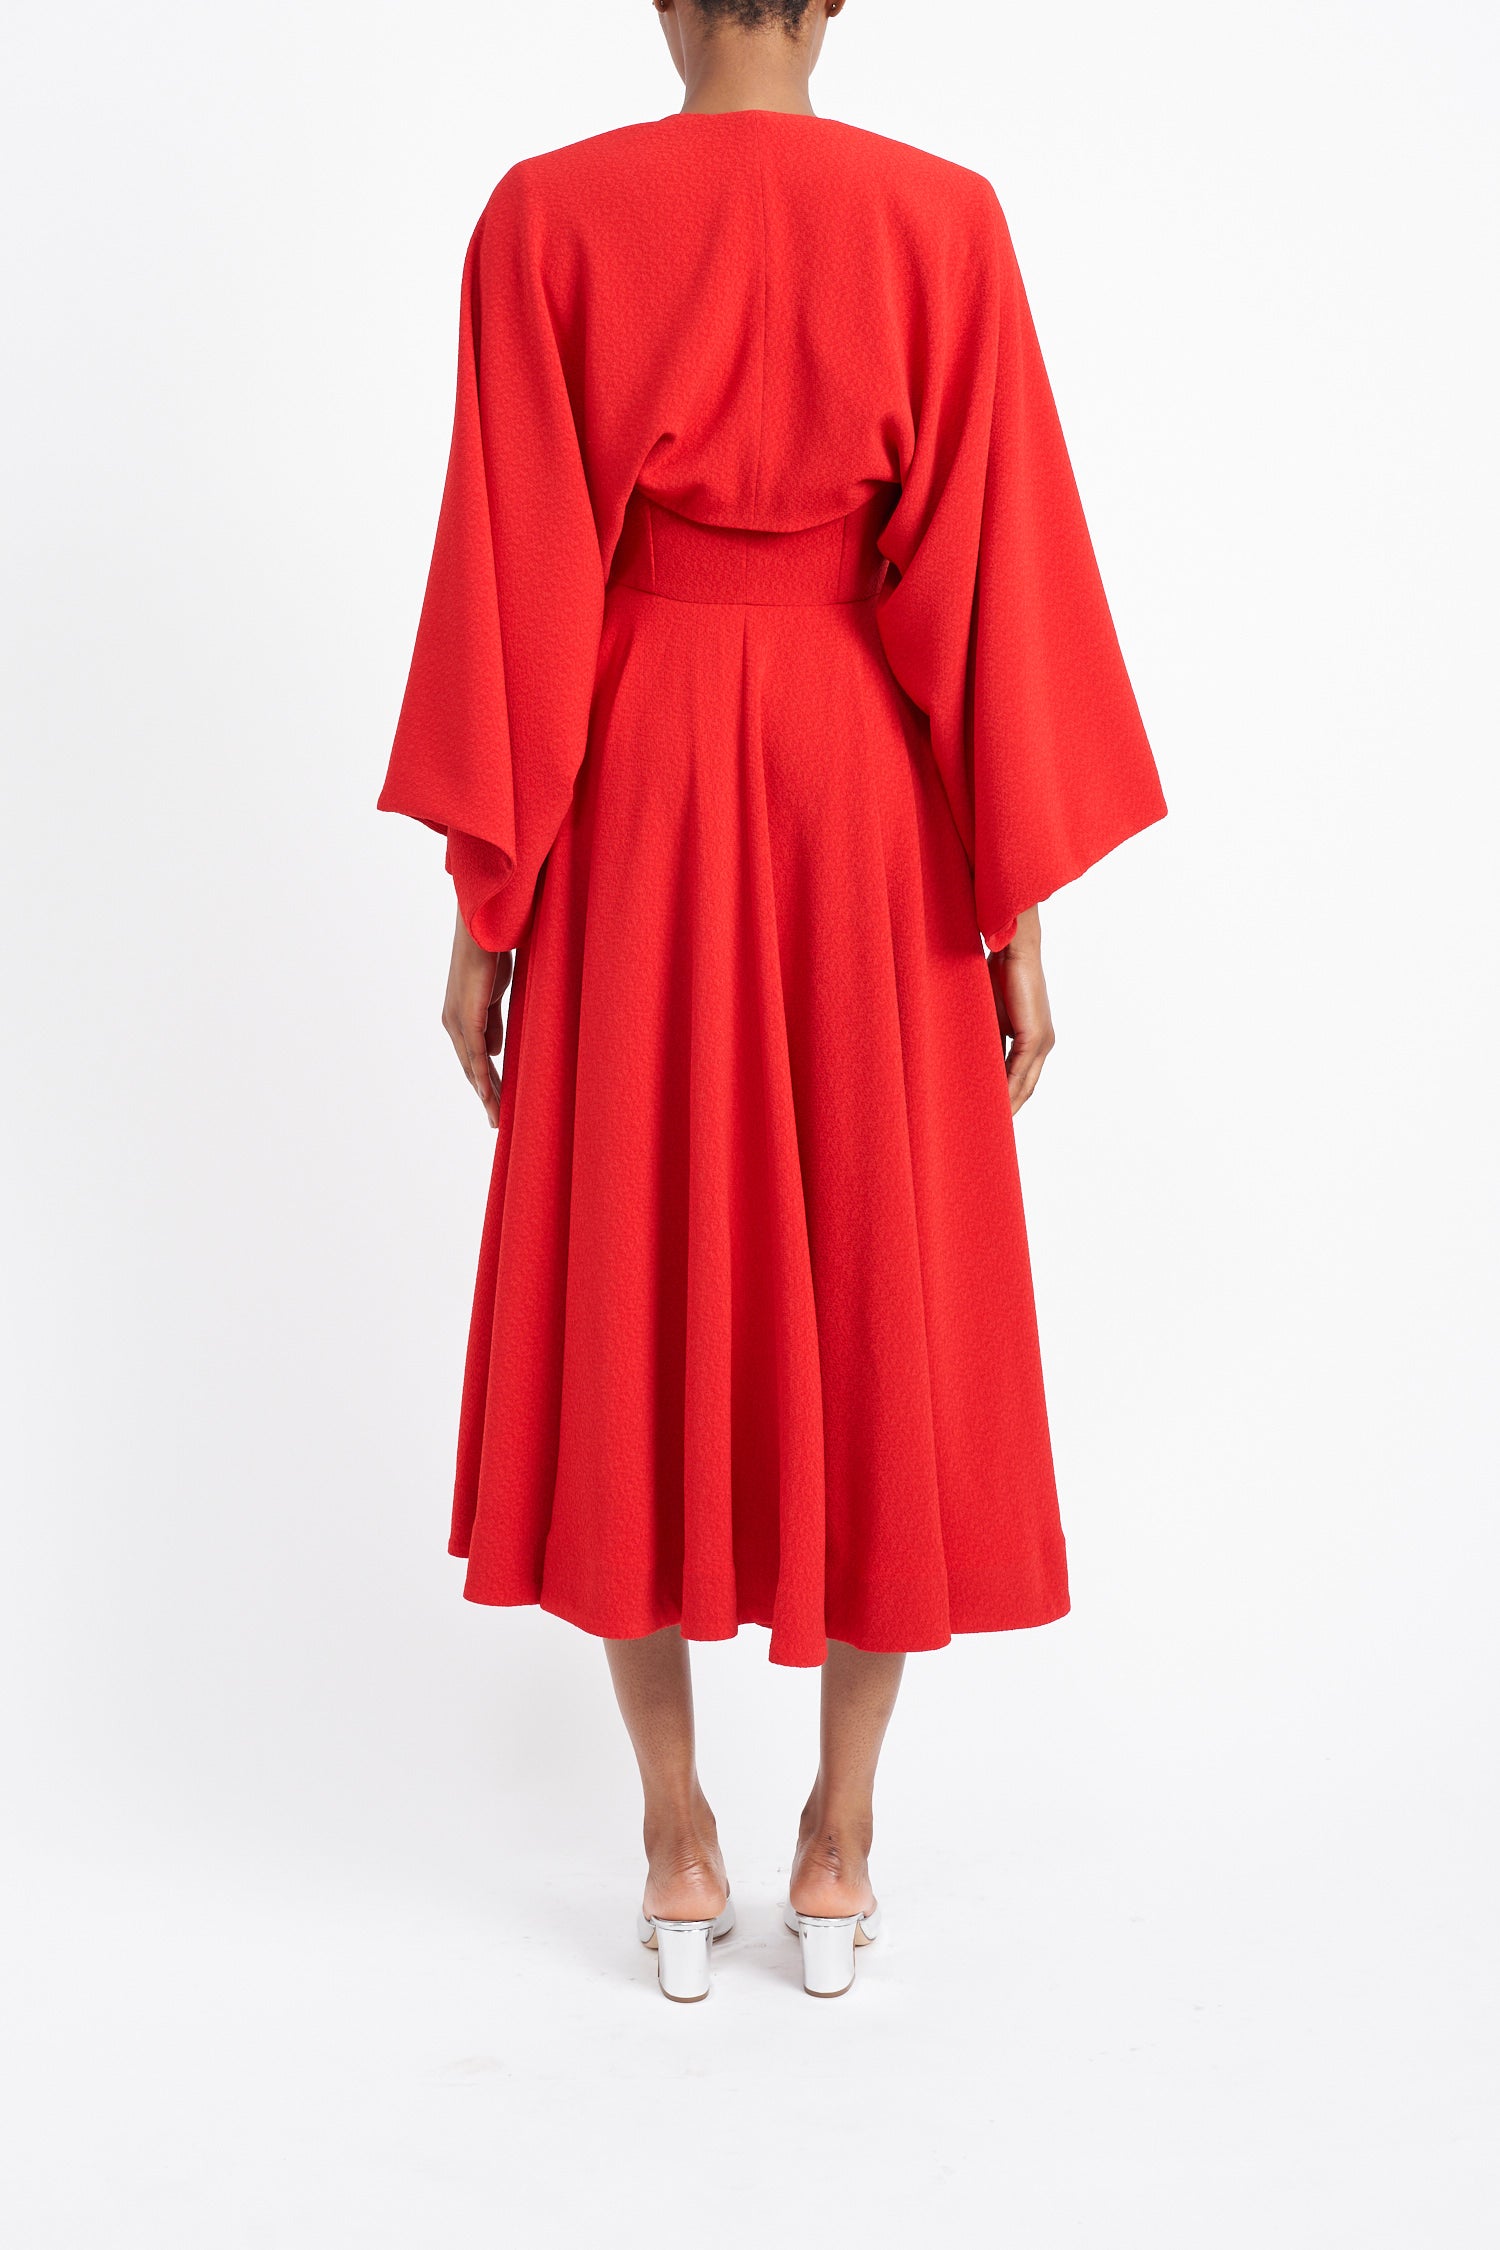 PALOMA LONG RED SUSTAINABLY SOURCED JACKET